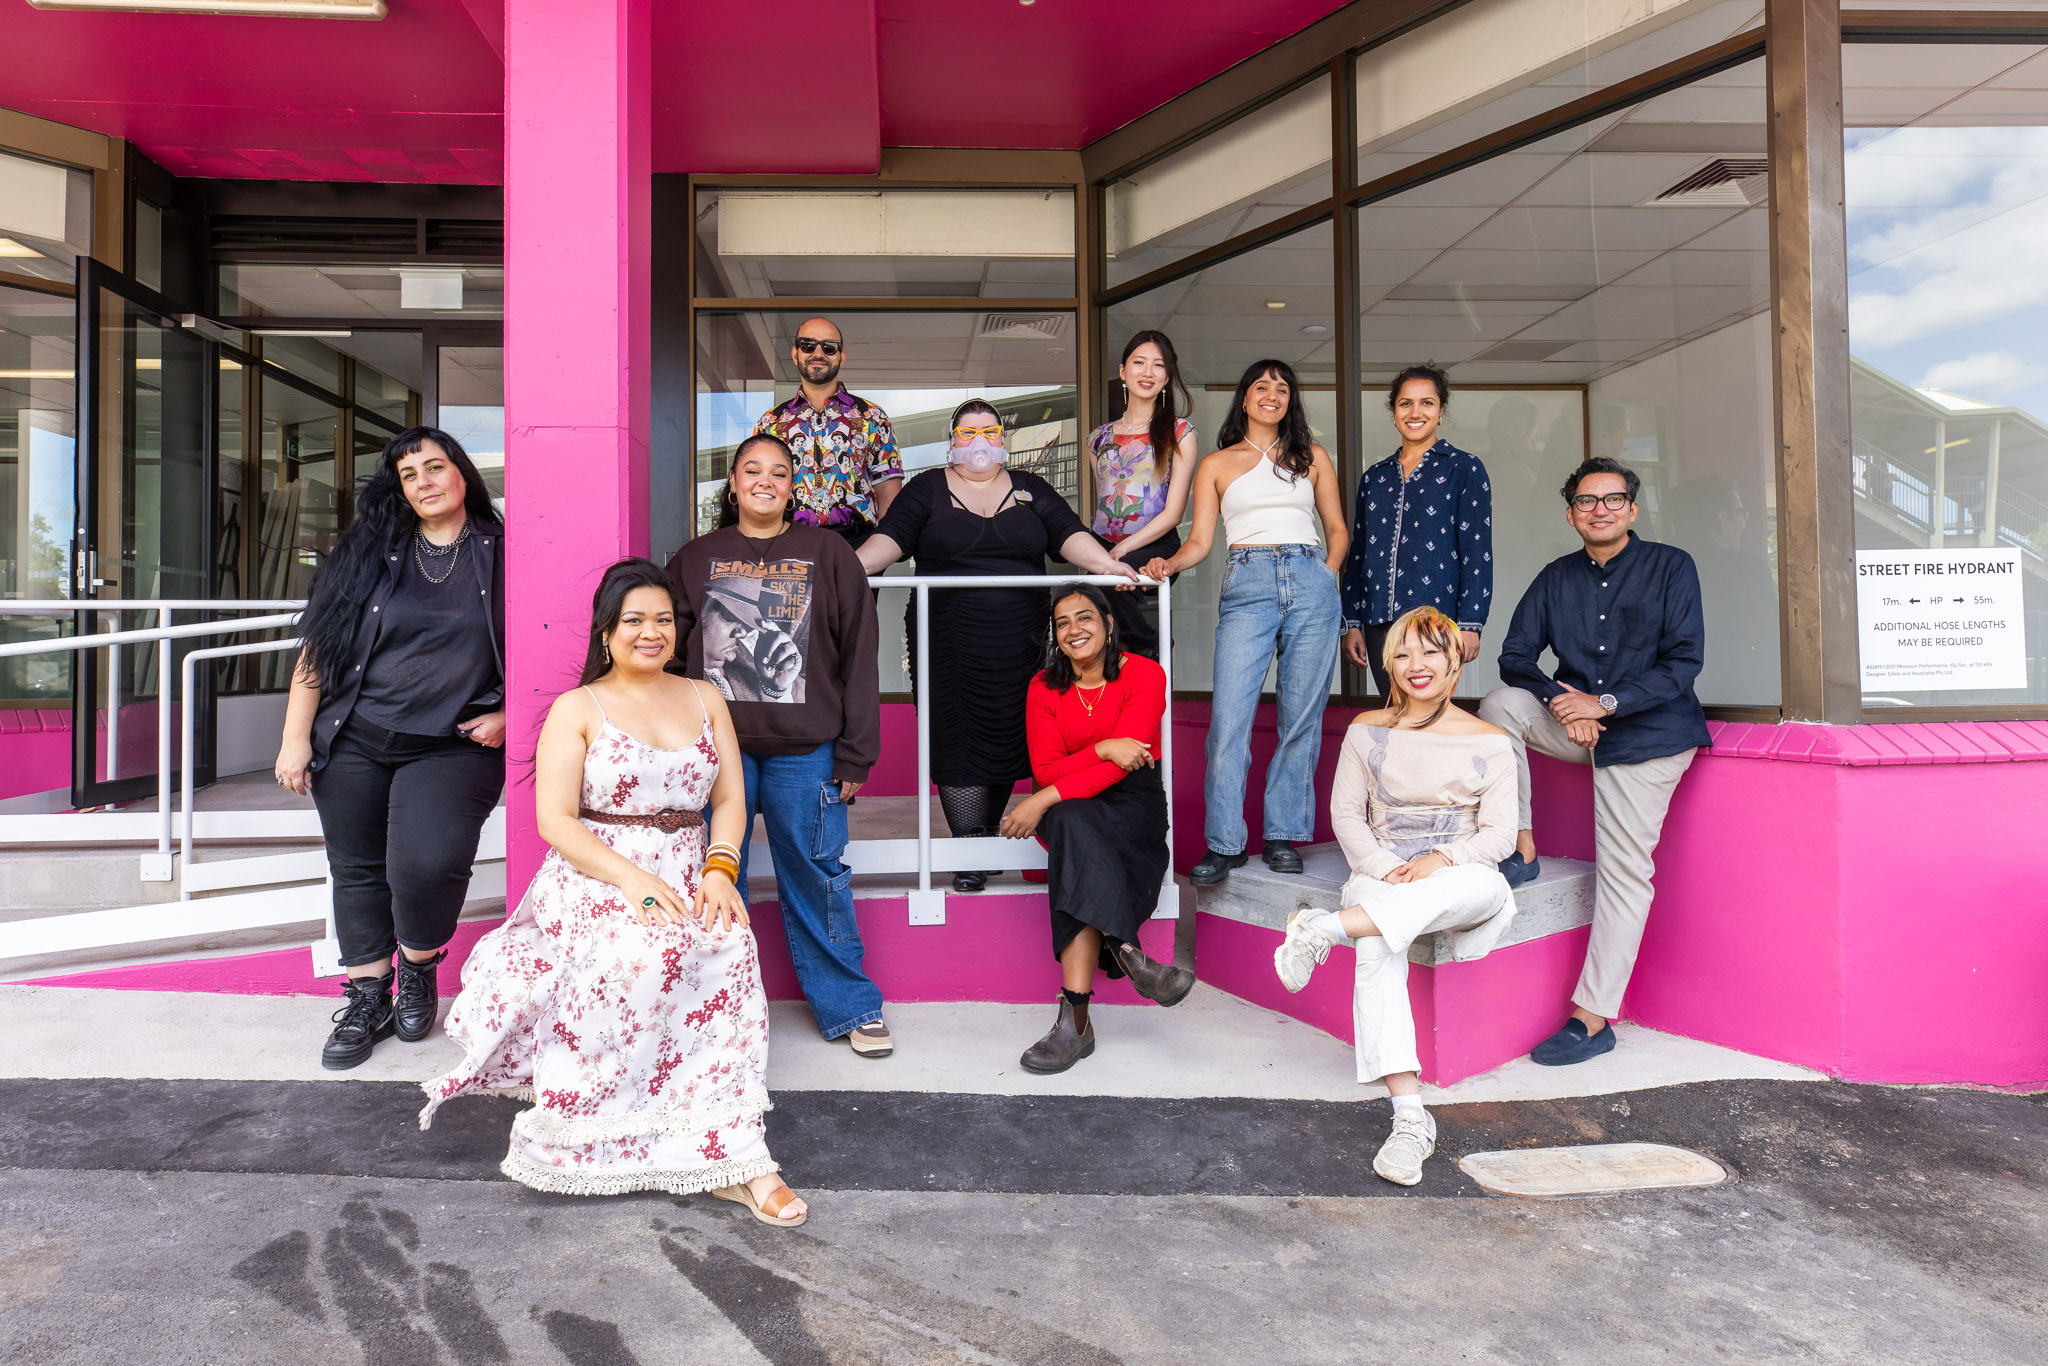 A group of people gathered together in front of a pink building facing the camera